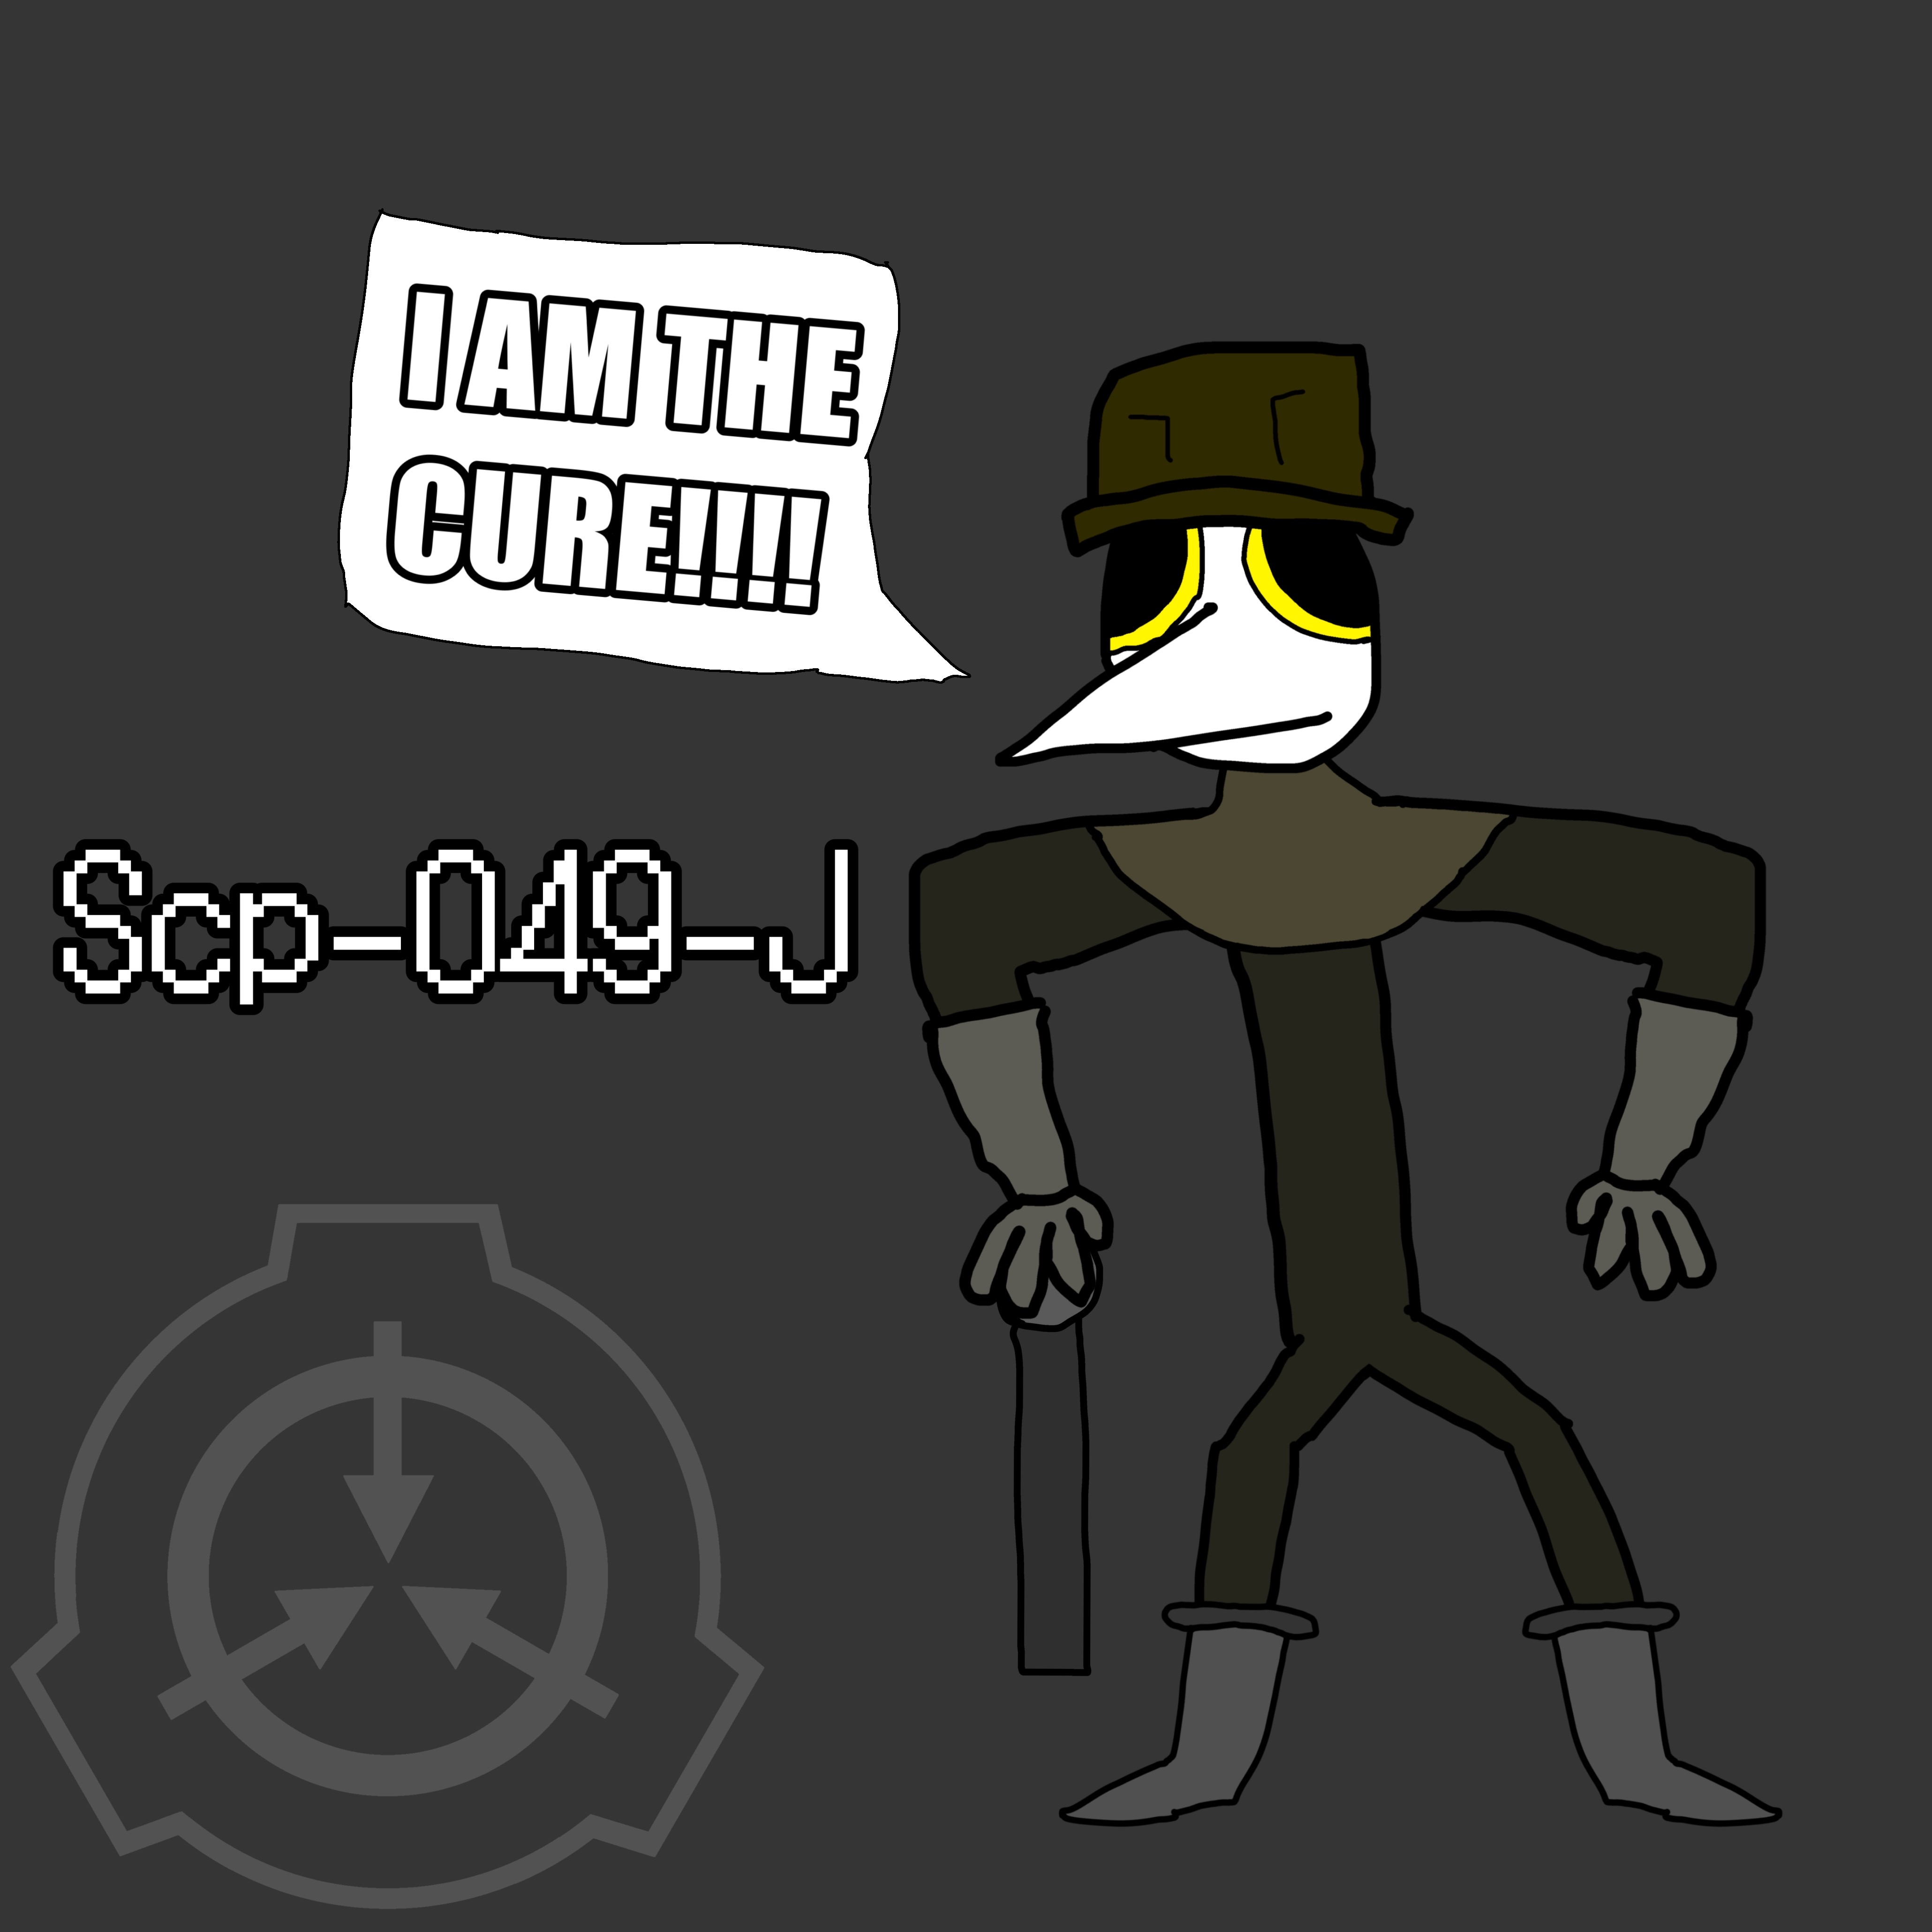 SCP 049 and 049 - j in 2023